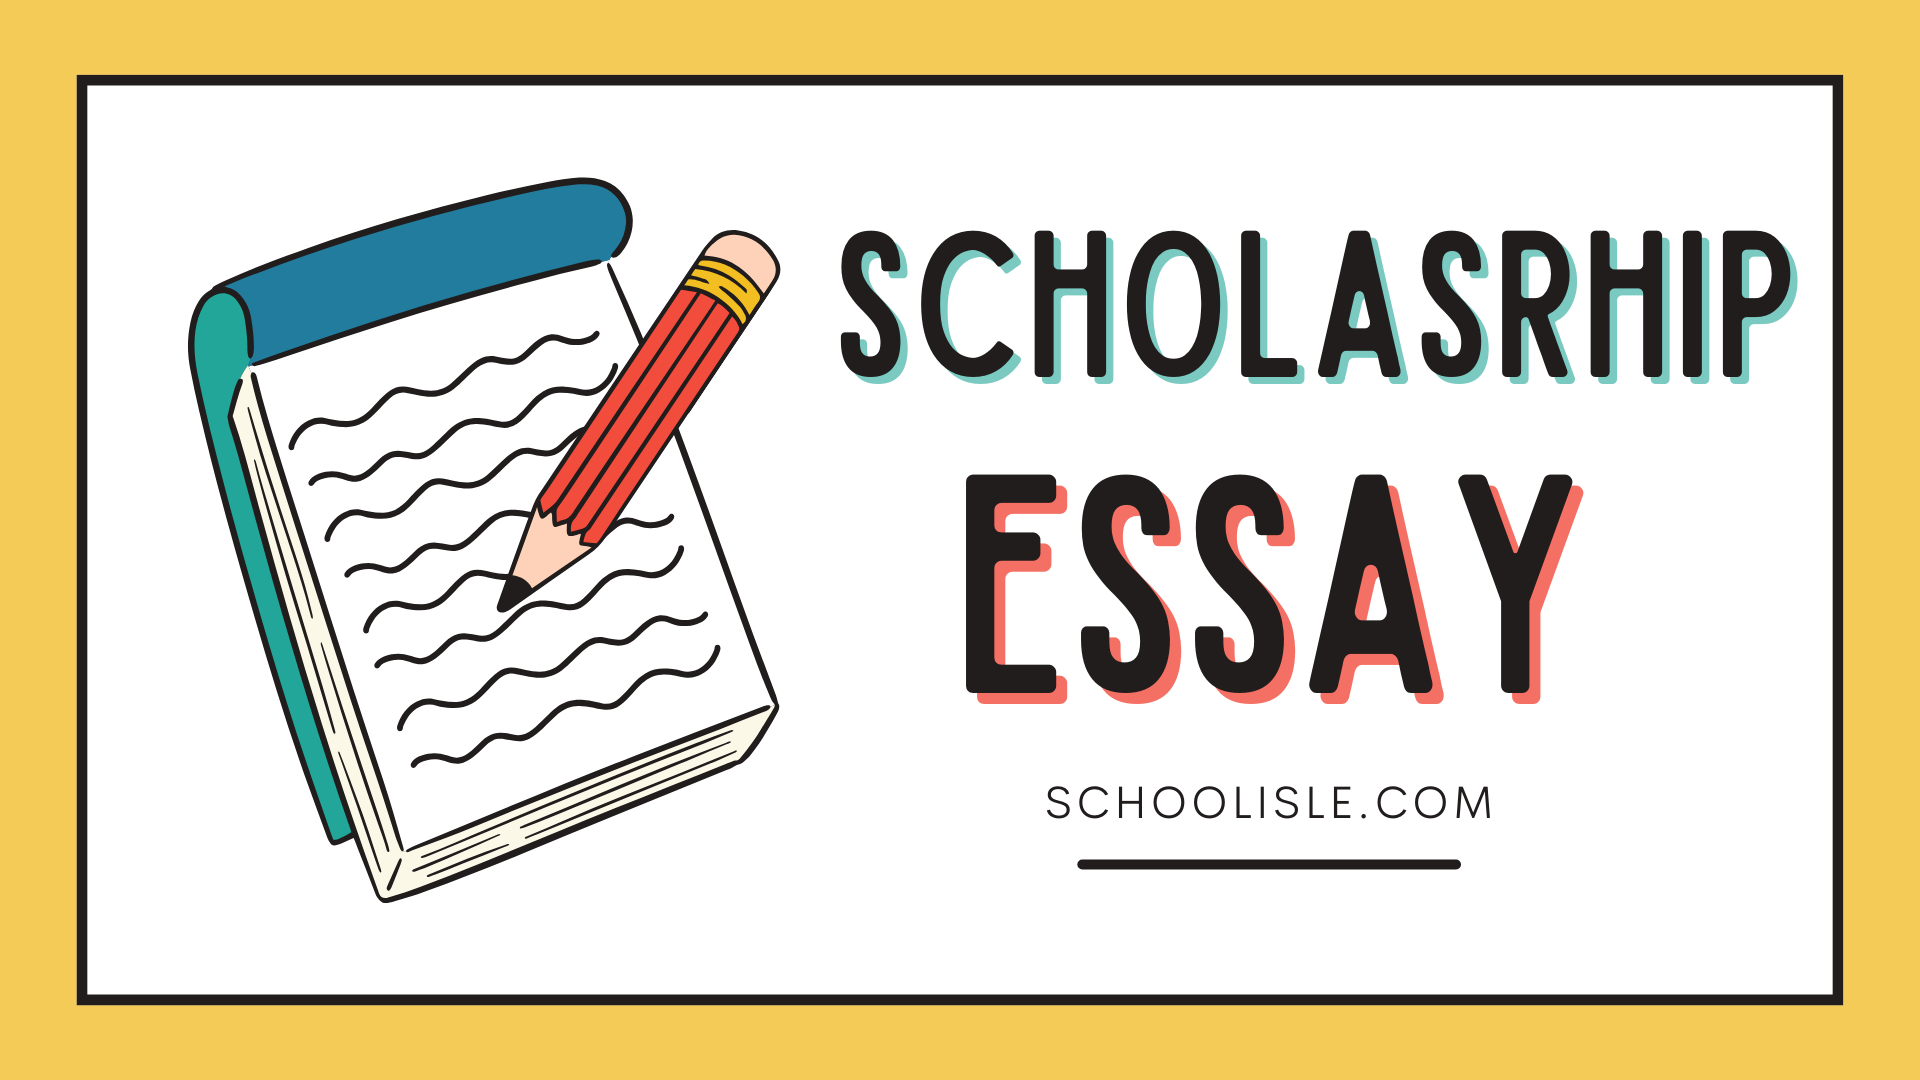 Scholarship Essay That Stands Out From the Rest